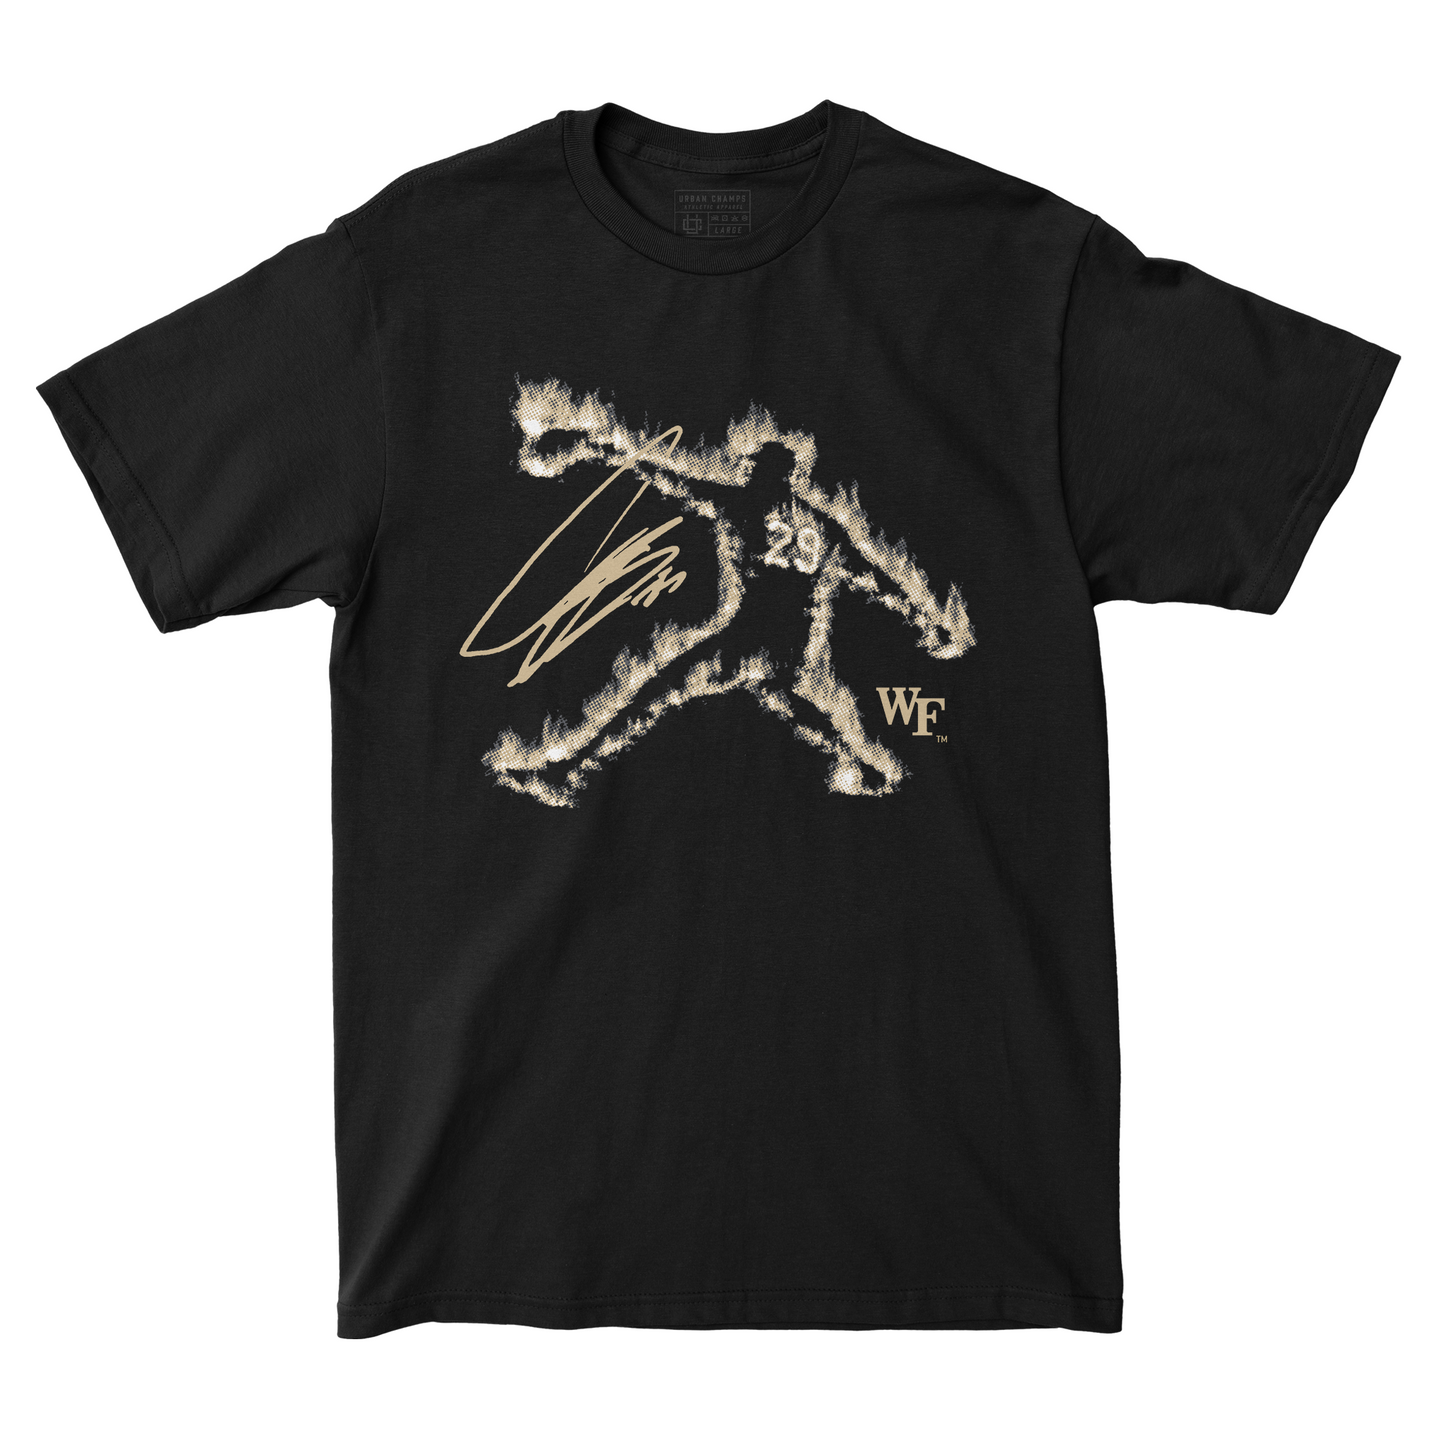 EXCLUSIVE RELEASE: Chase Burns - Silhouette Tee